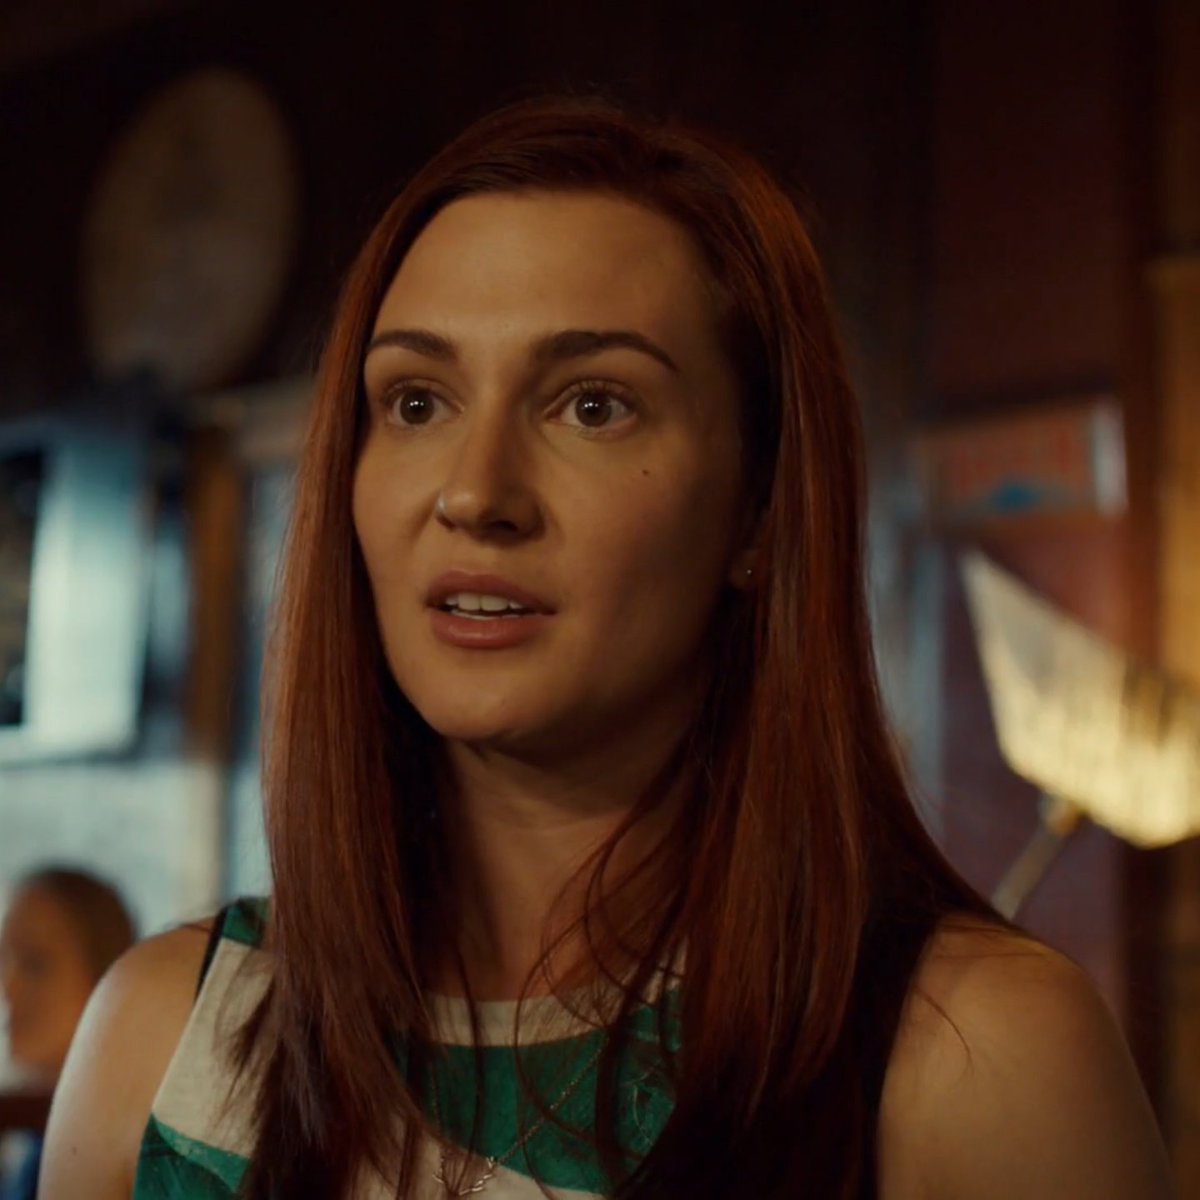 "But I'm still going to be your Sheriff. 'Cause I made a promise. I made a promise to serve and protect every single person in this town. Even those that break the law." #WynonnaEarp  #BringWynonnaHome